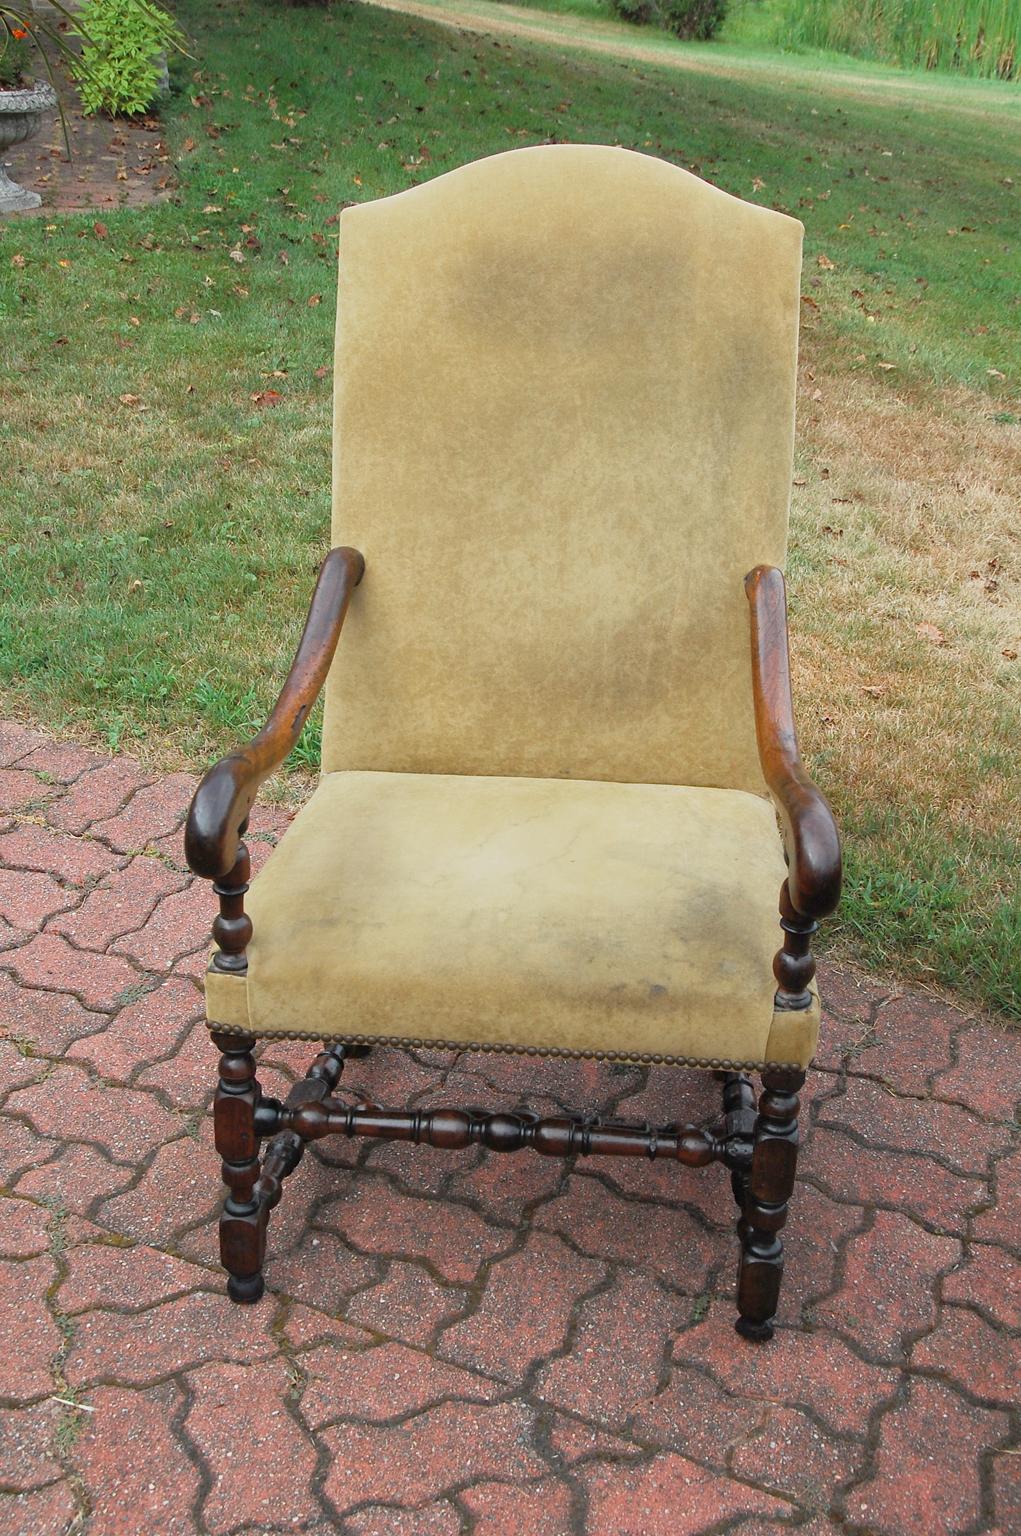 English William and Mary period walnut lounging chair. This handsome tall backed chair has carved scroll arms, beautifully turned legs, front stretcher and 